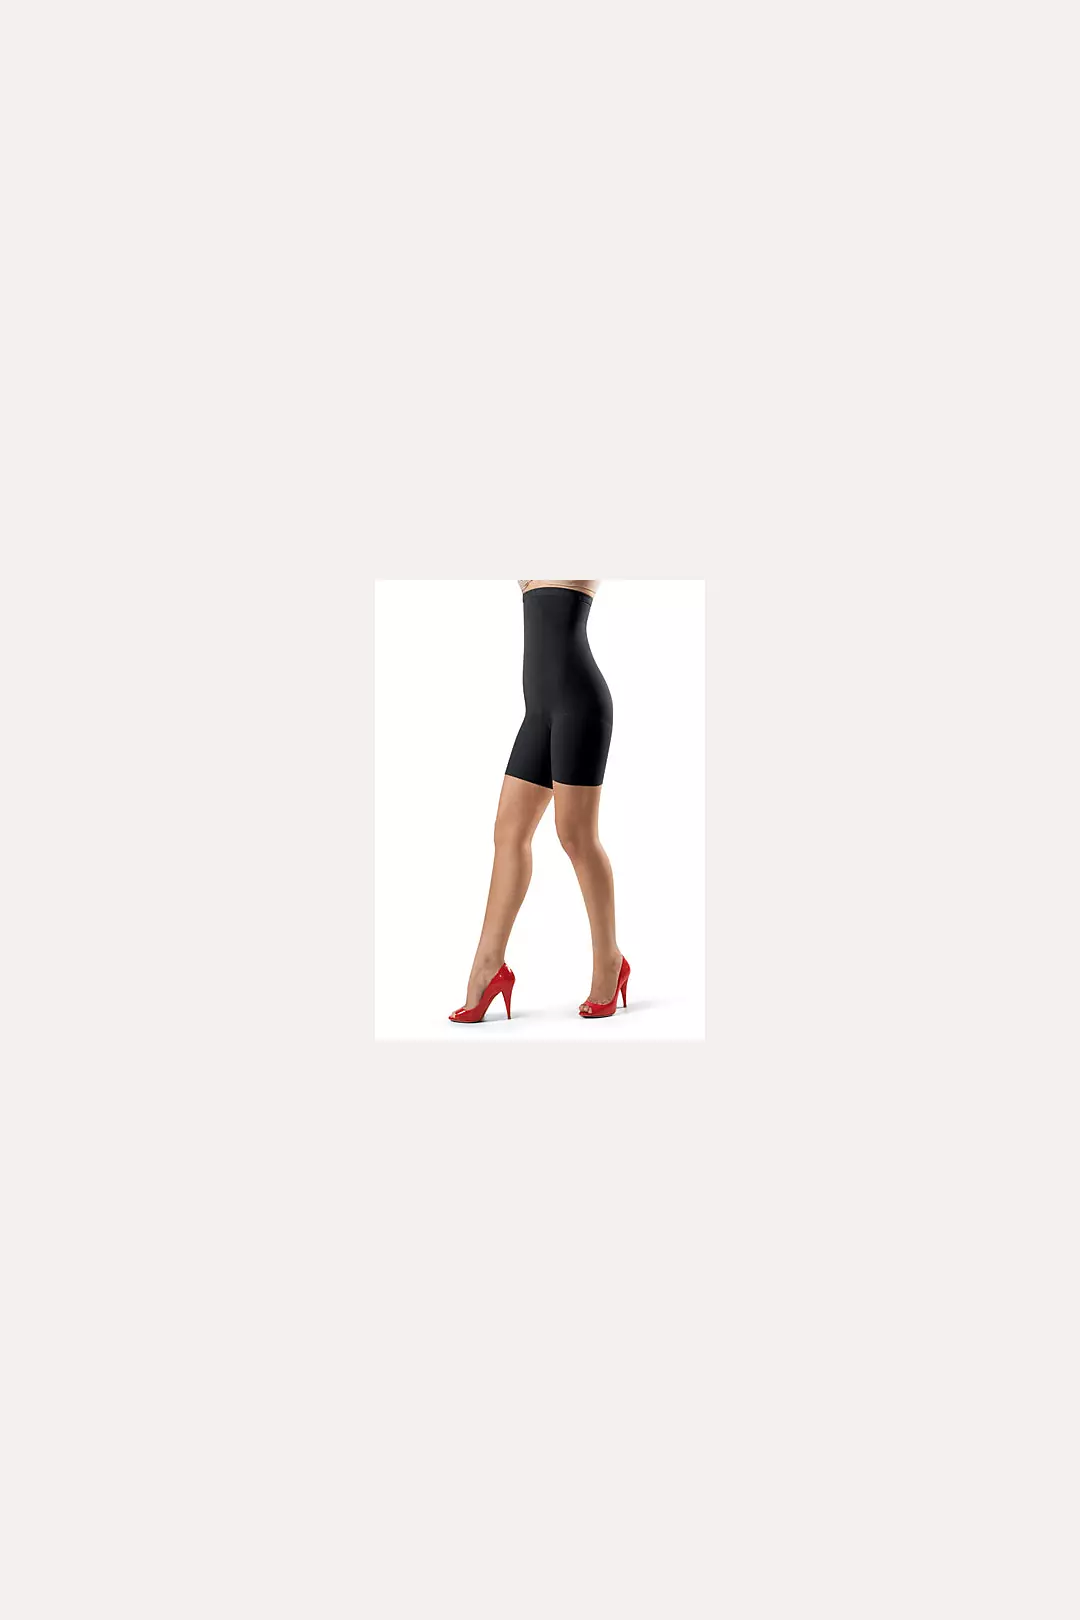 ▷ ASSETS by Sara Blakely A Spanx Brand Women's Mid-Thigh